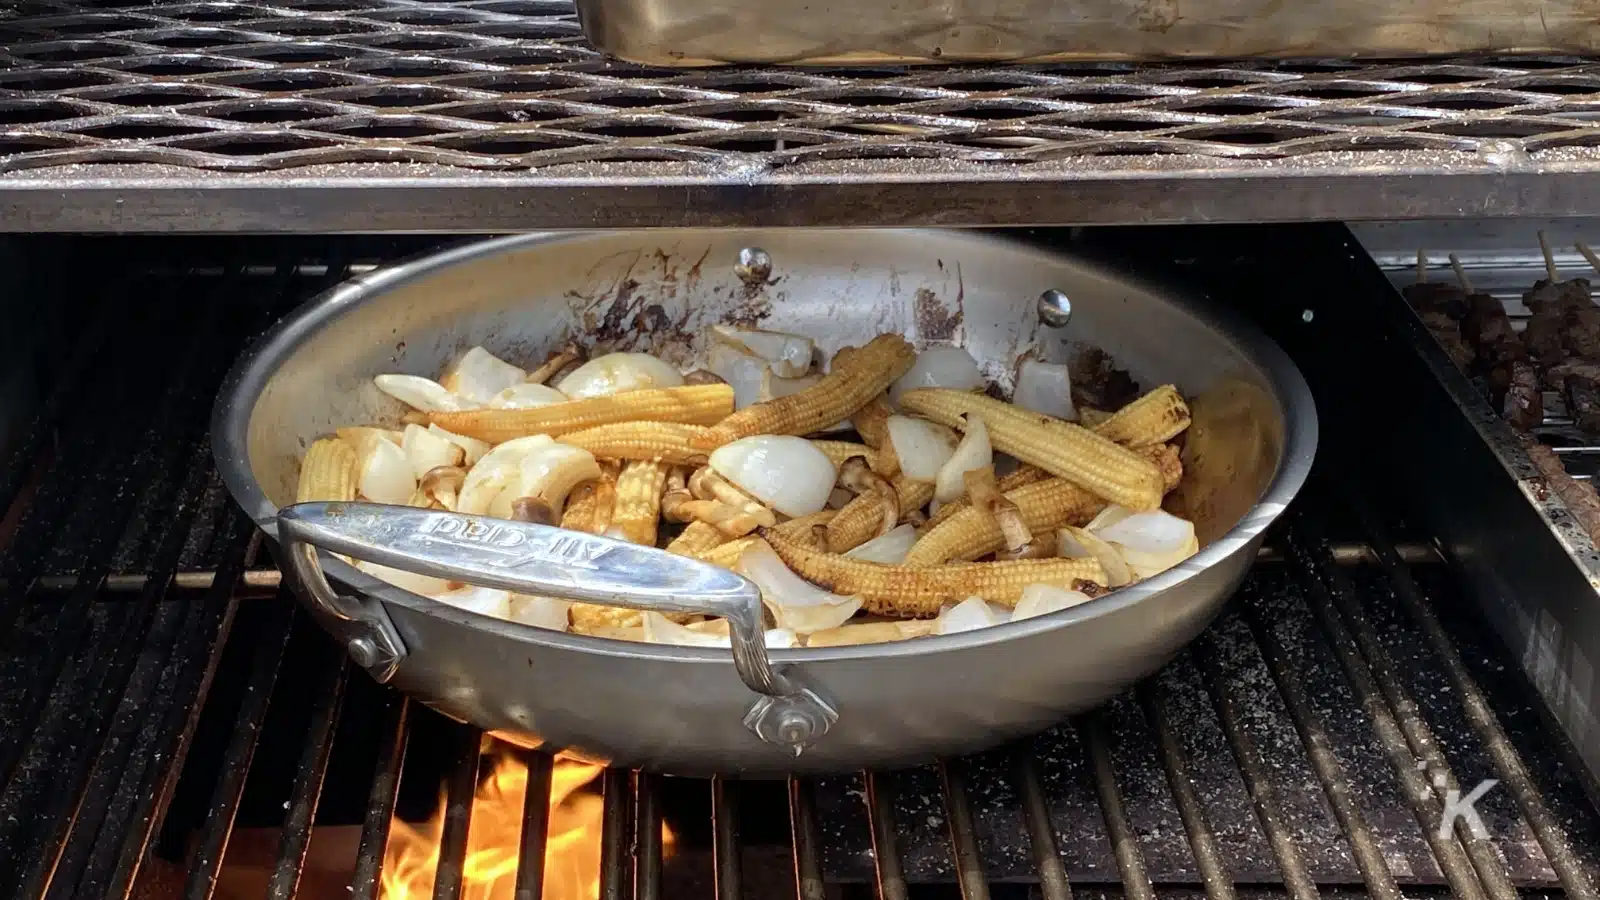 A cook is grilling chicken pieces and frying french fries in a pan of hot oil over a fast food restaurant's grill.